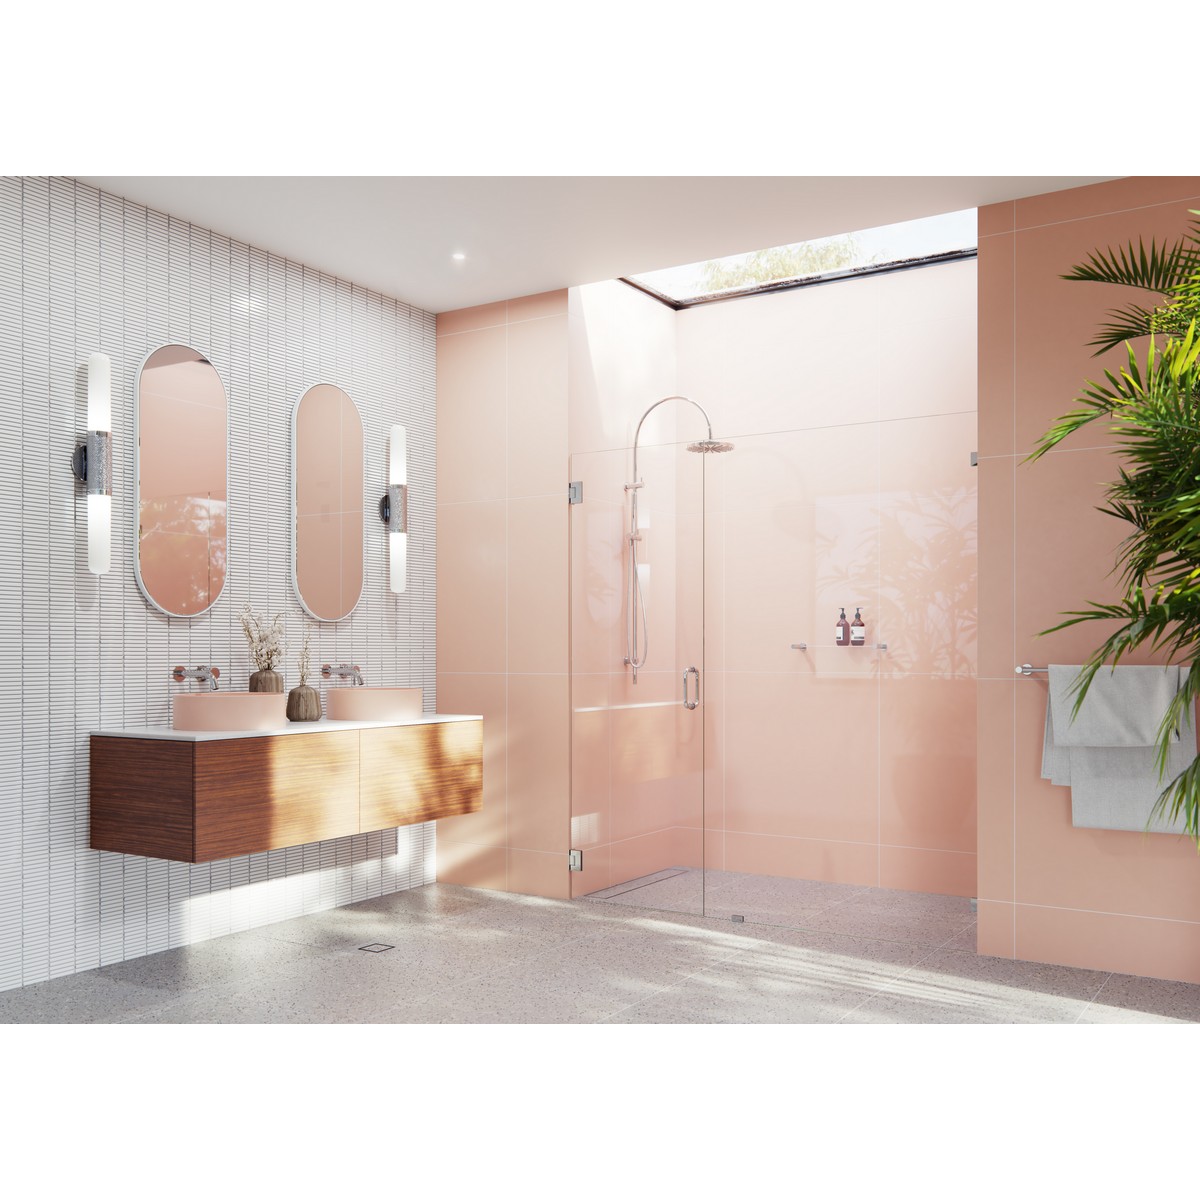 GLASS WAREHOUSE GW-WH-70.25 ILLUME 70 1/4 W X 78 H WALL HINGED FULLY FRAMELESS GLASS SHOWER ENCLOSURE